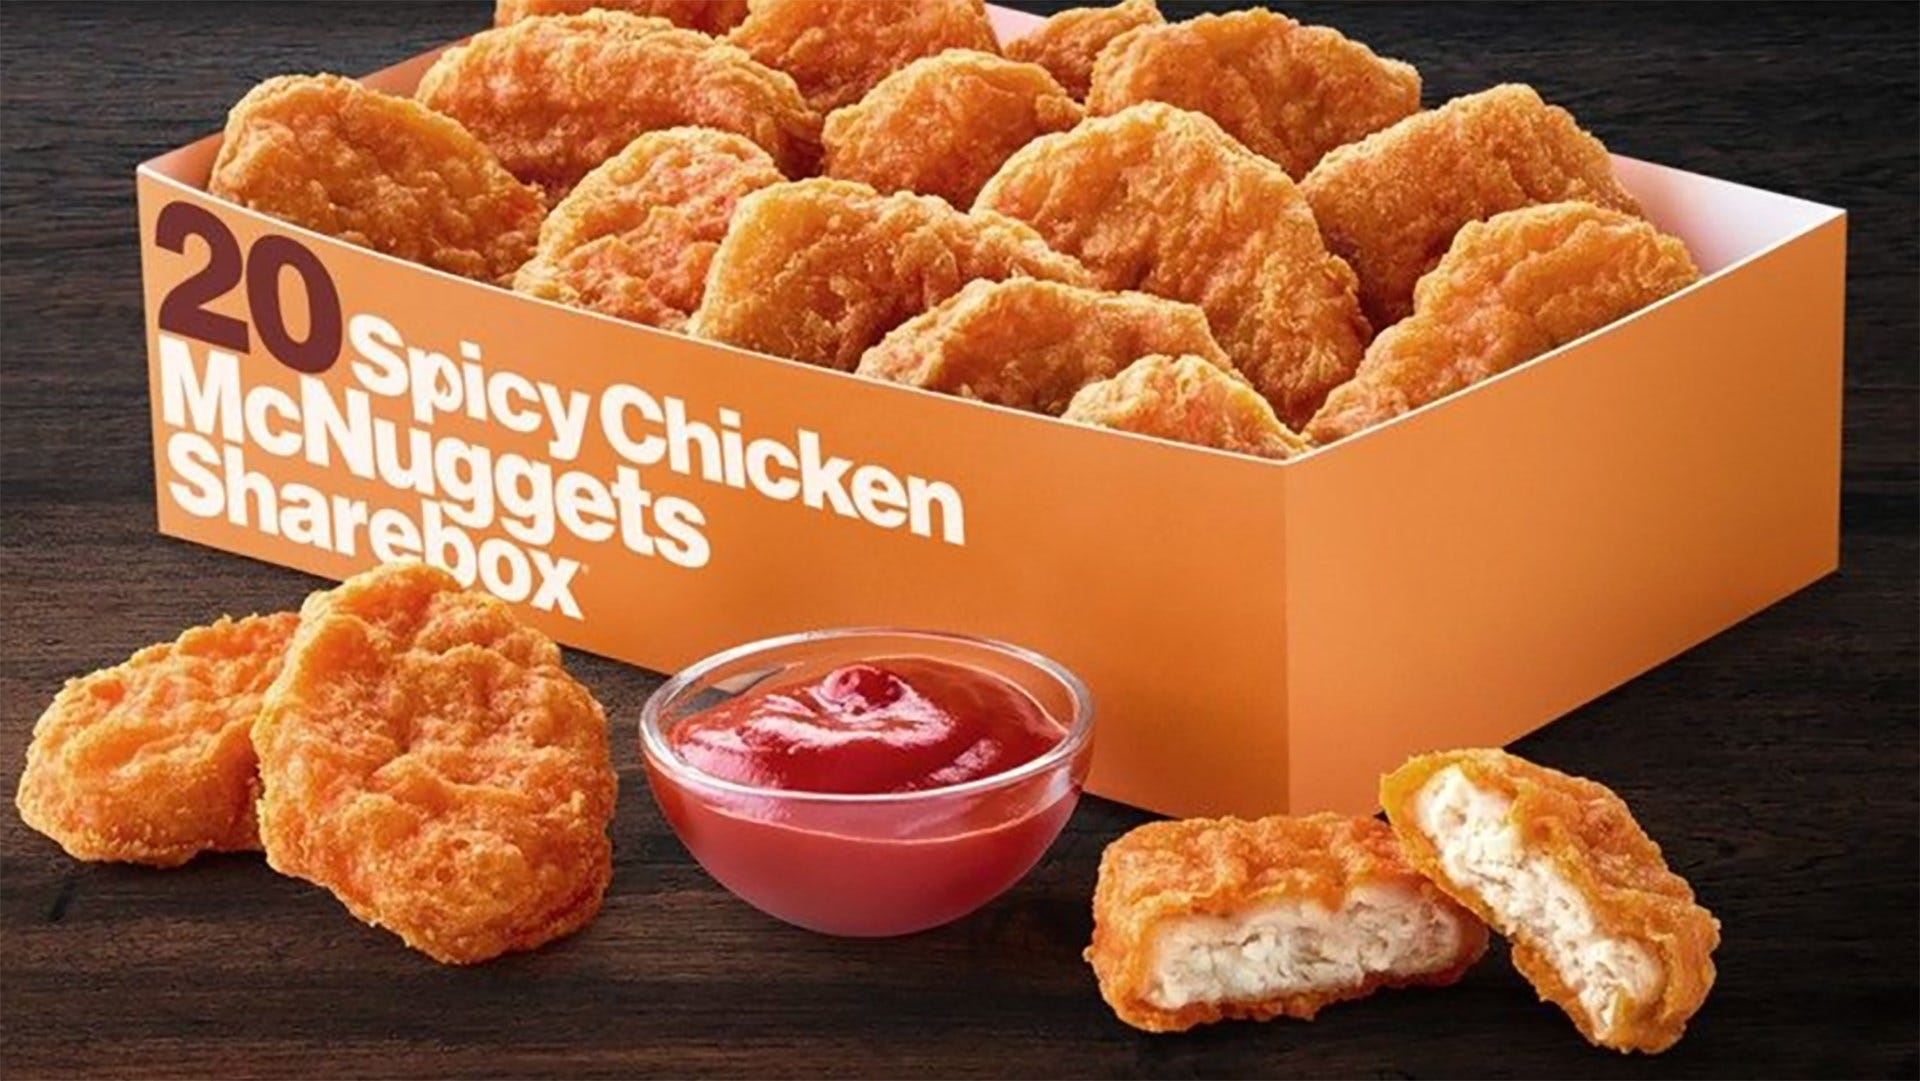 people who dodged bullets - mcdonald's spicy nuggets - 20 Spicy Chicken McNuggets box